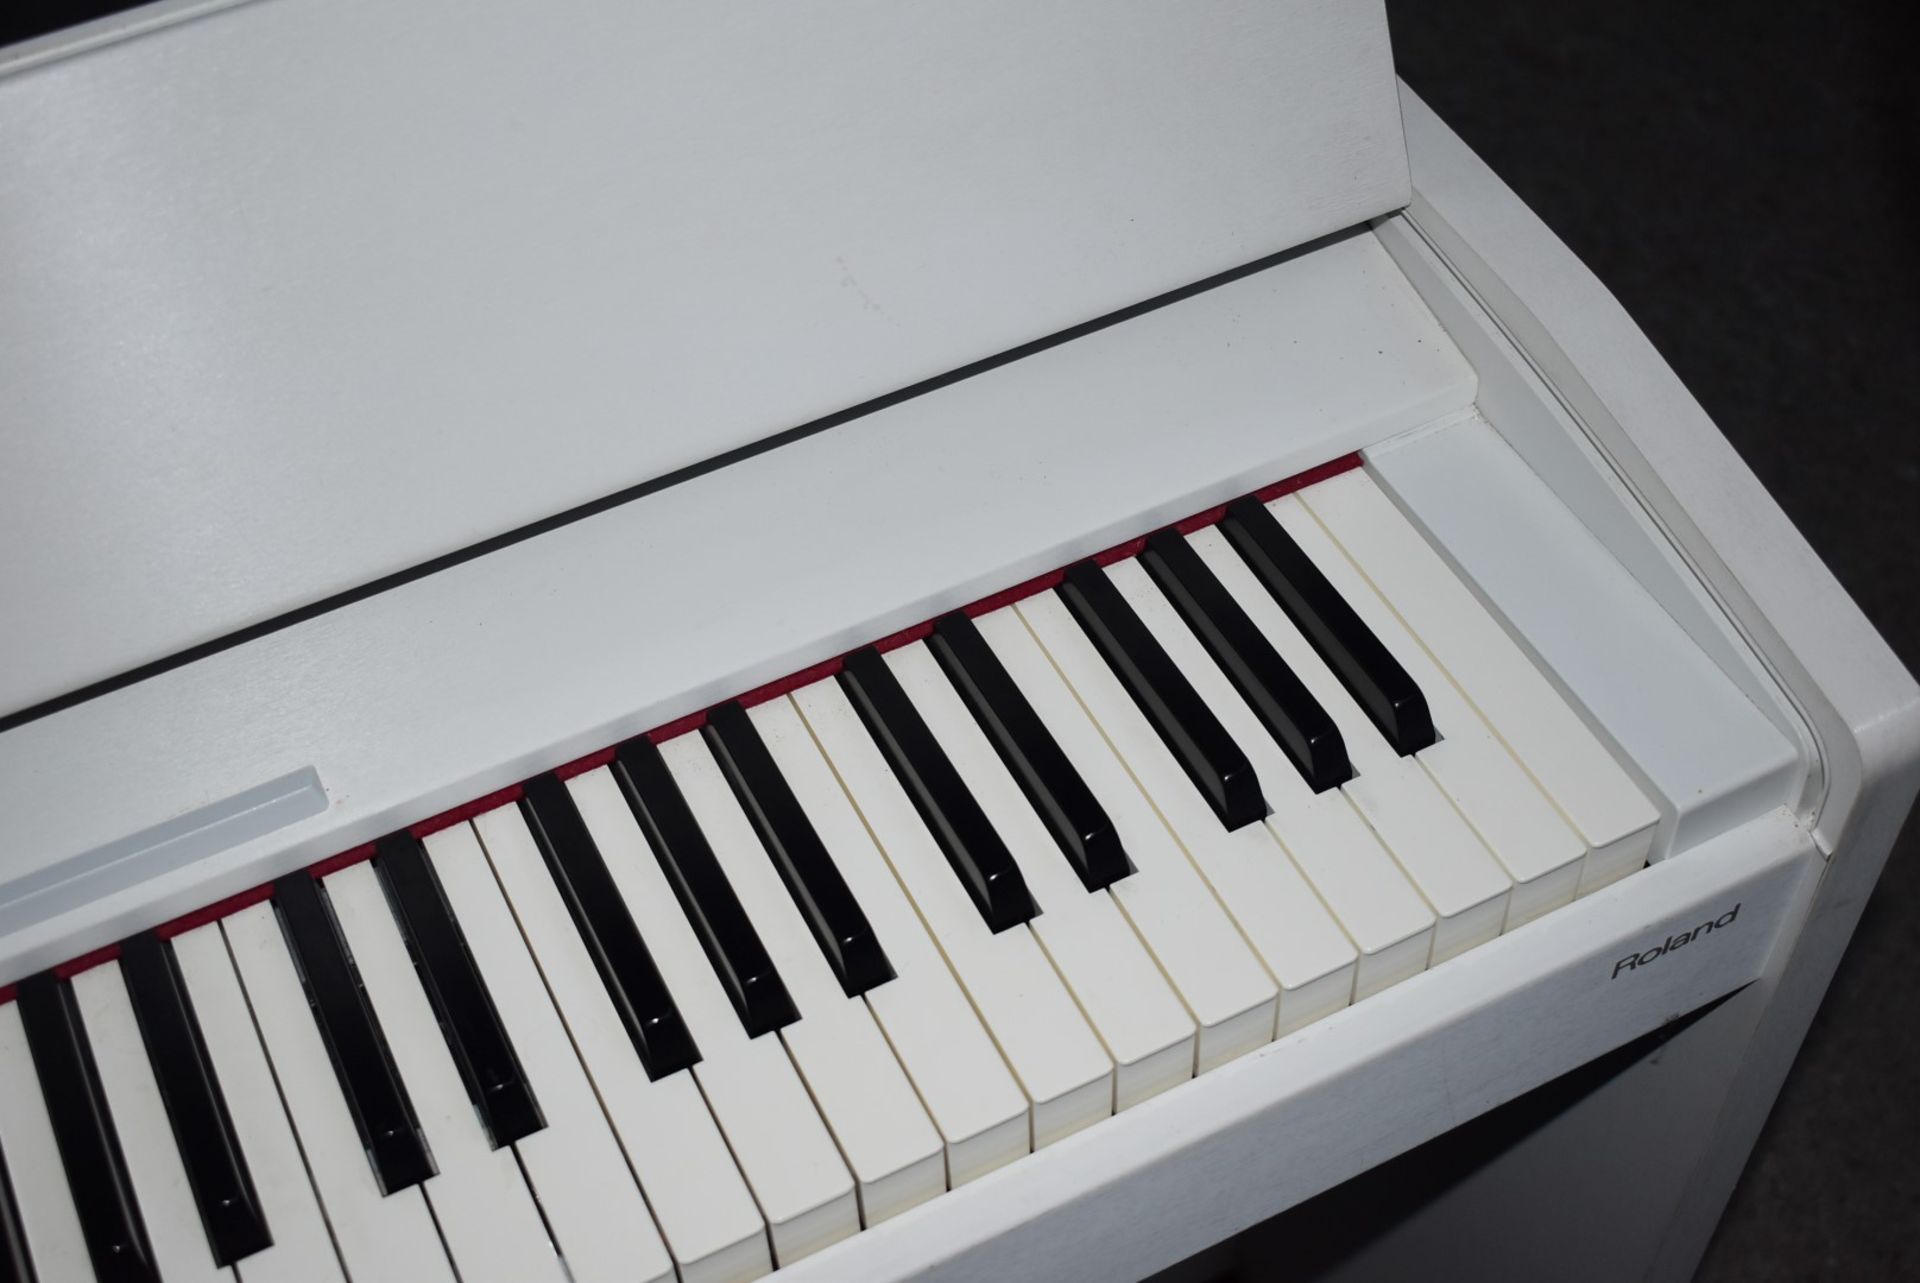 1 x Roland F120 SuperNATURAL Digital Electronic Piano - Good Condition, In Working Order - Image 9 of 16